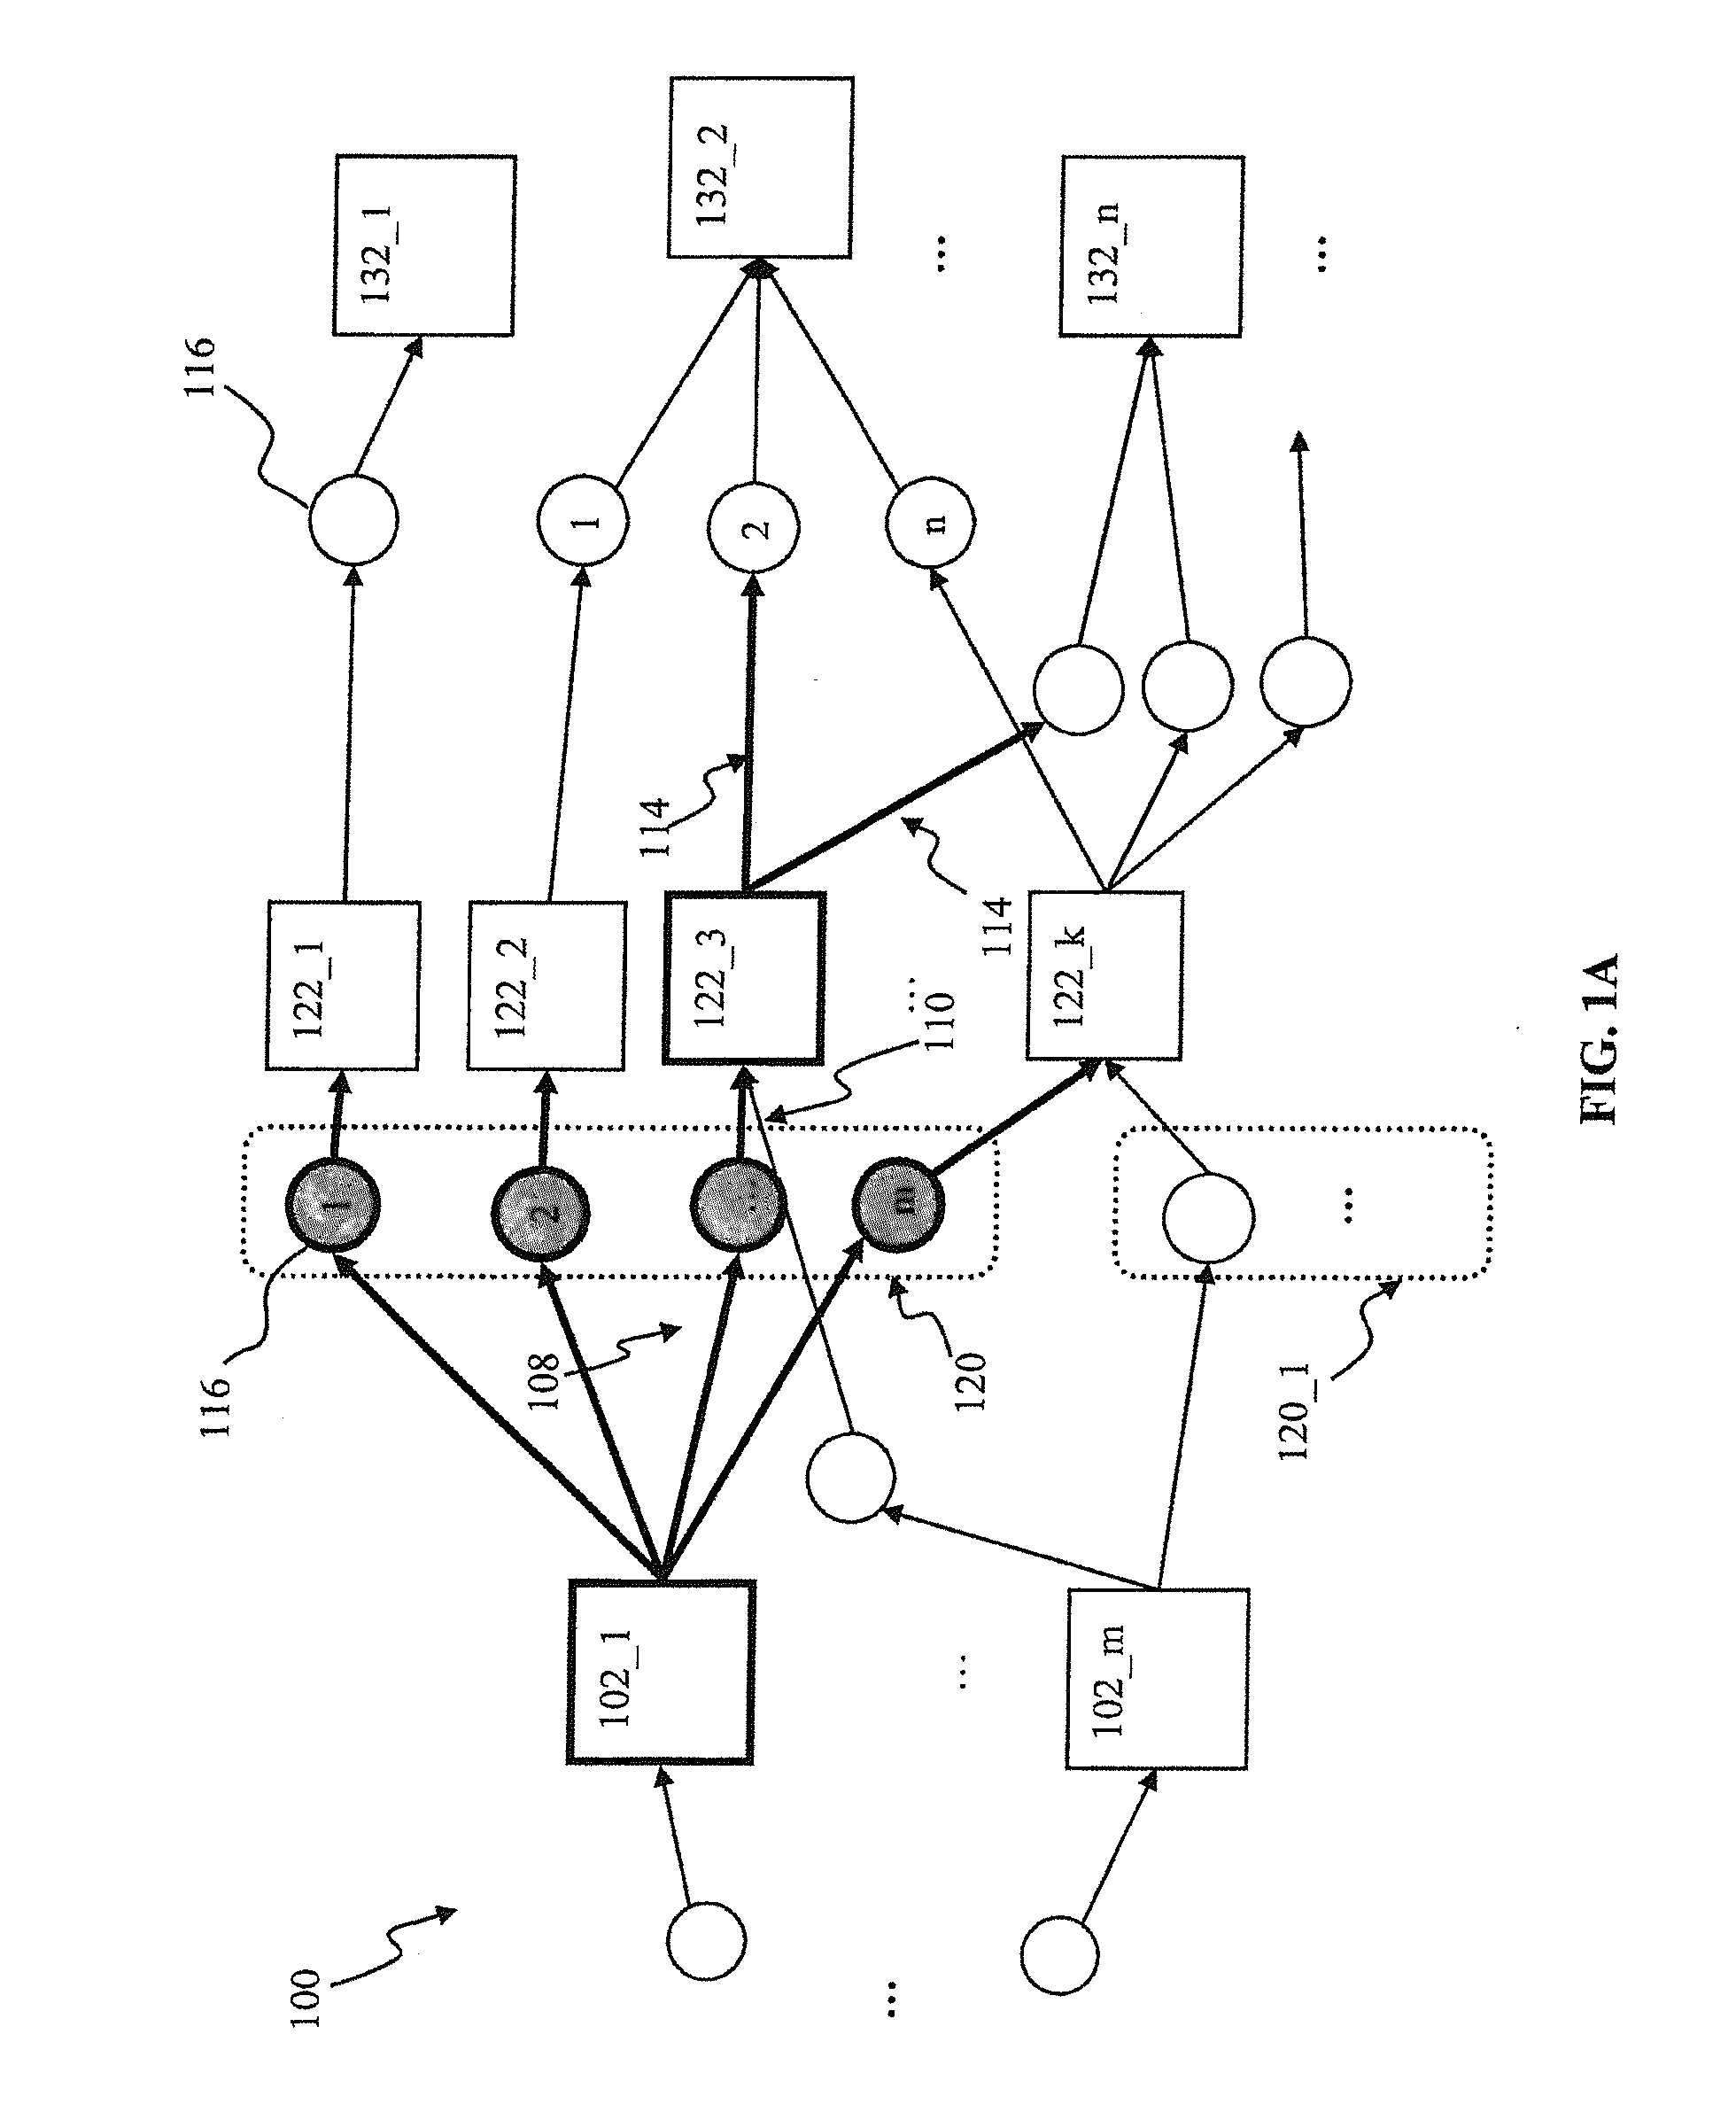 Apparatus and method for partial evaluation of synaptic updates based on system events